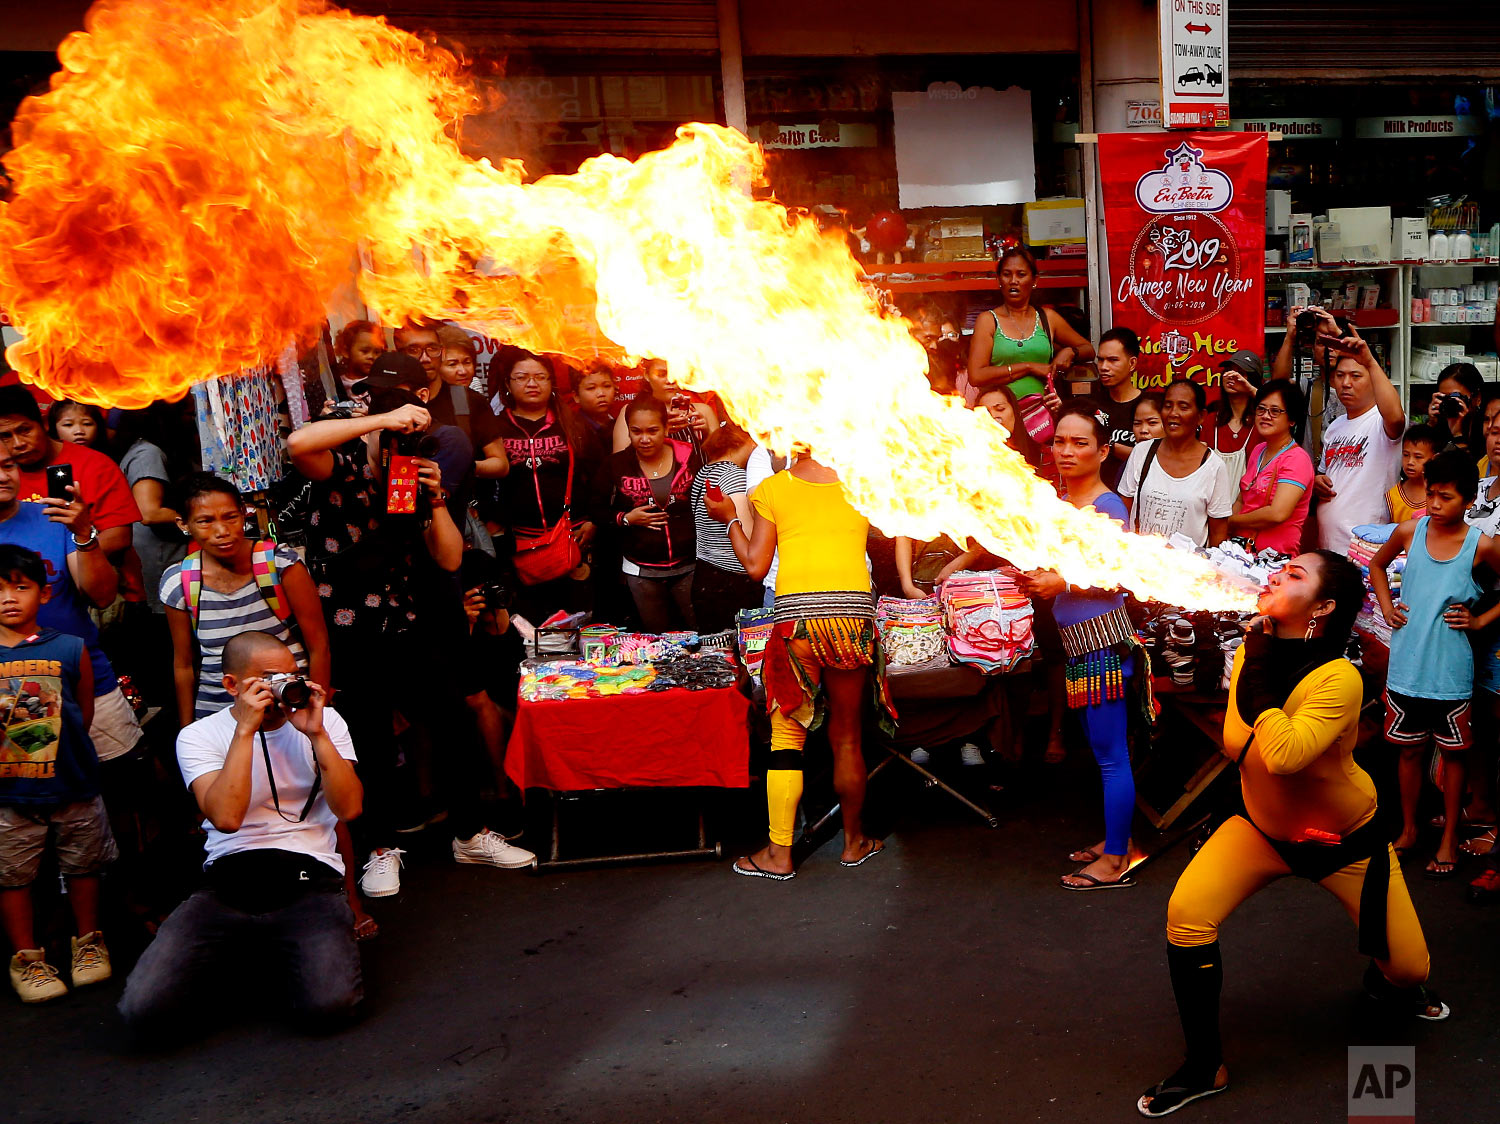  Fire-eater performs during celebrations of the Lunar New Year in the Chinatown district of Manila, Philippines, Tuesday, Feb. 5, 2019.  (AP Photo/Bullit Marquez) 